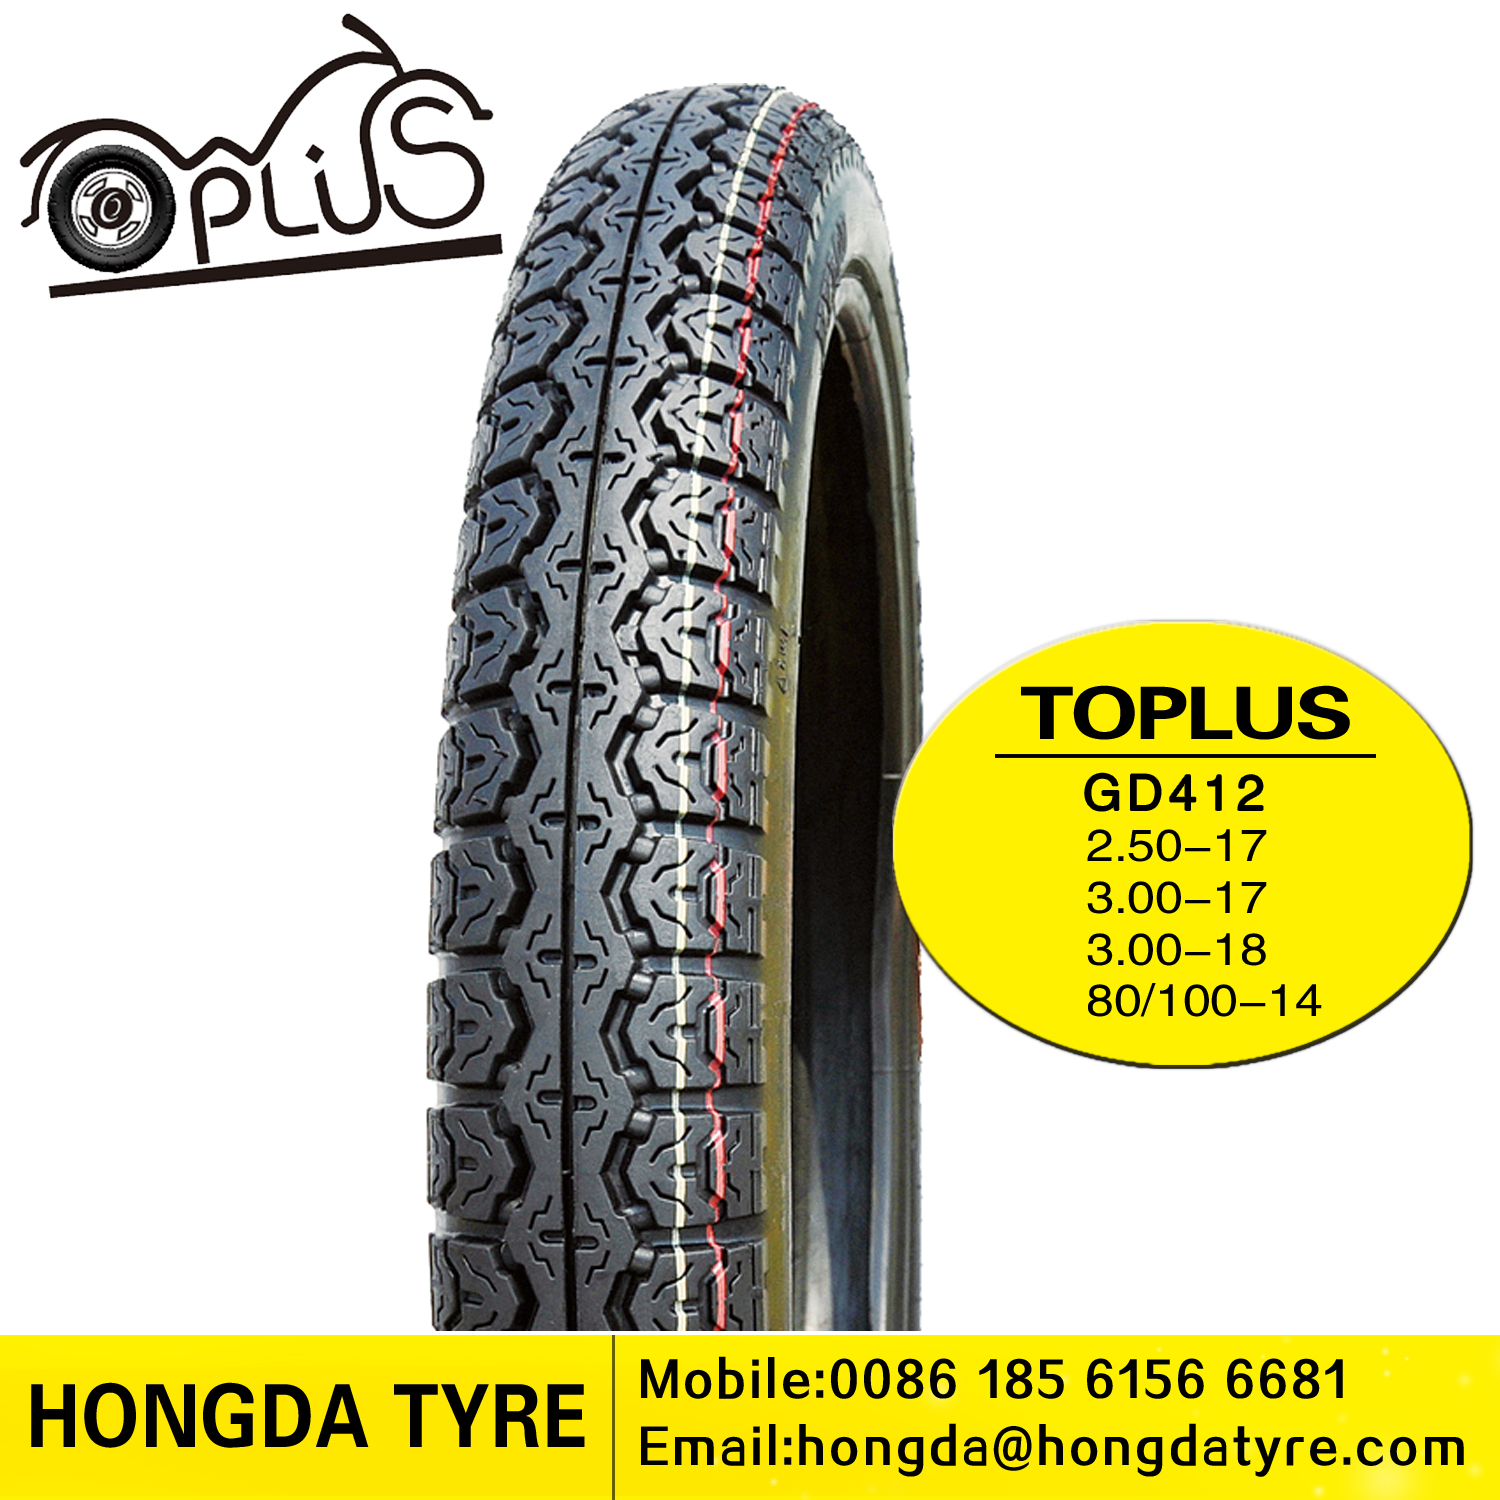 Motorcycle tyre GD412